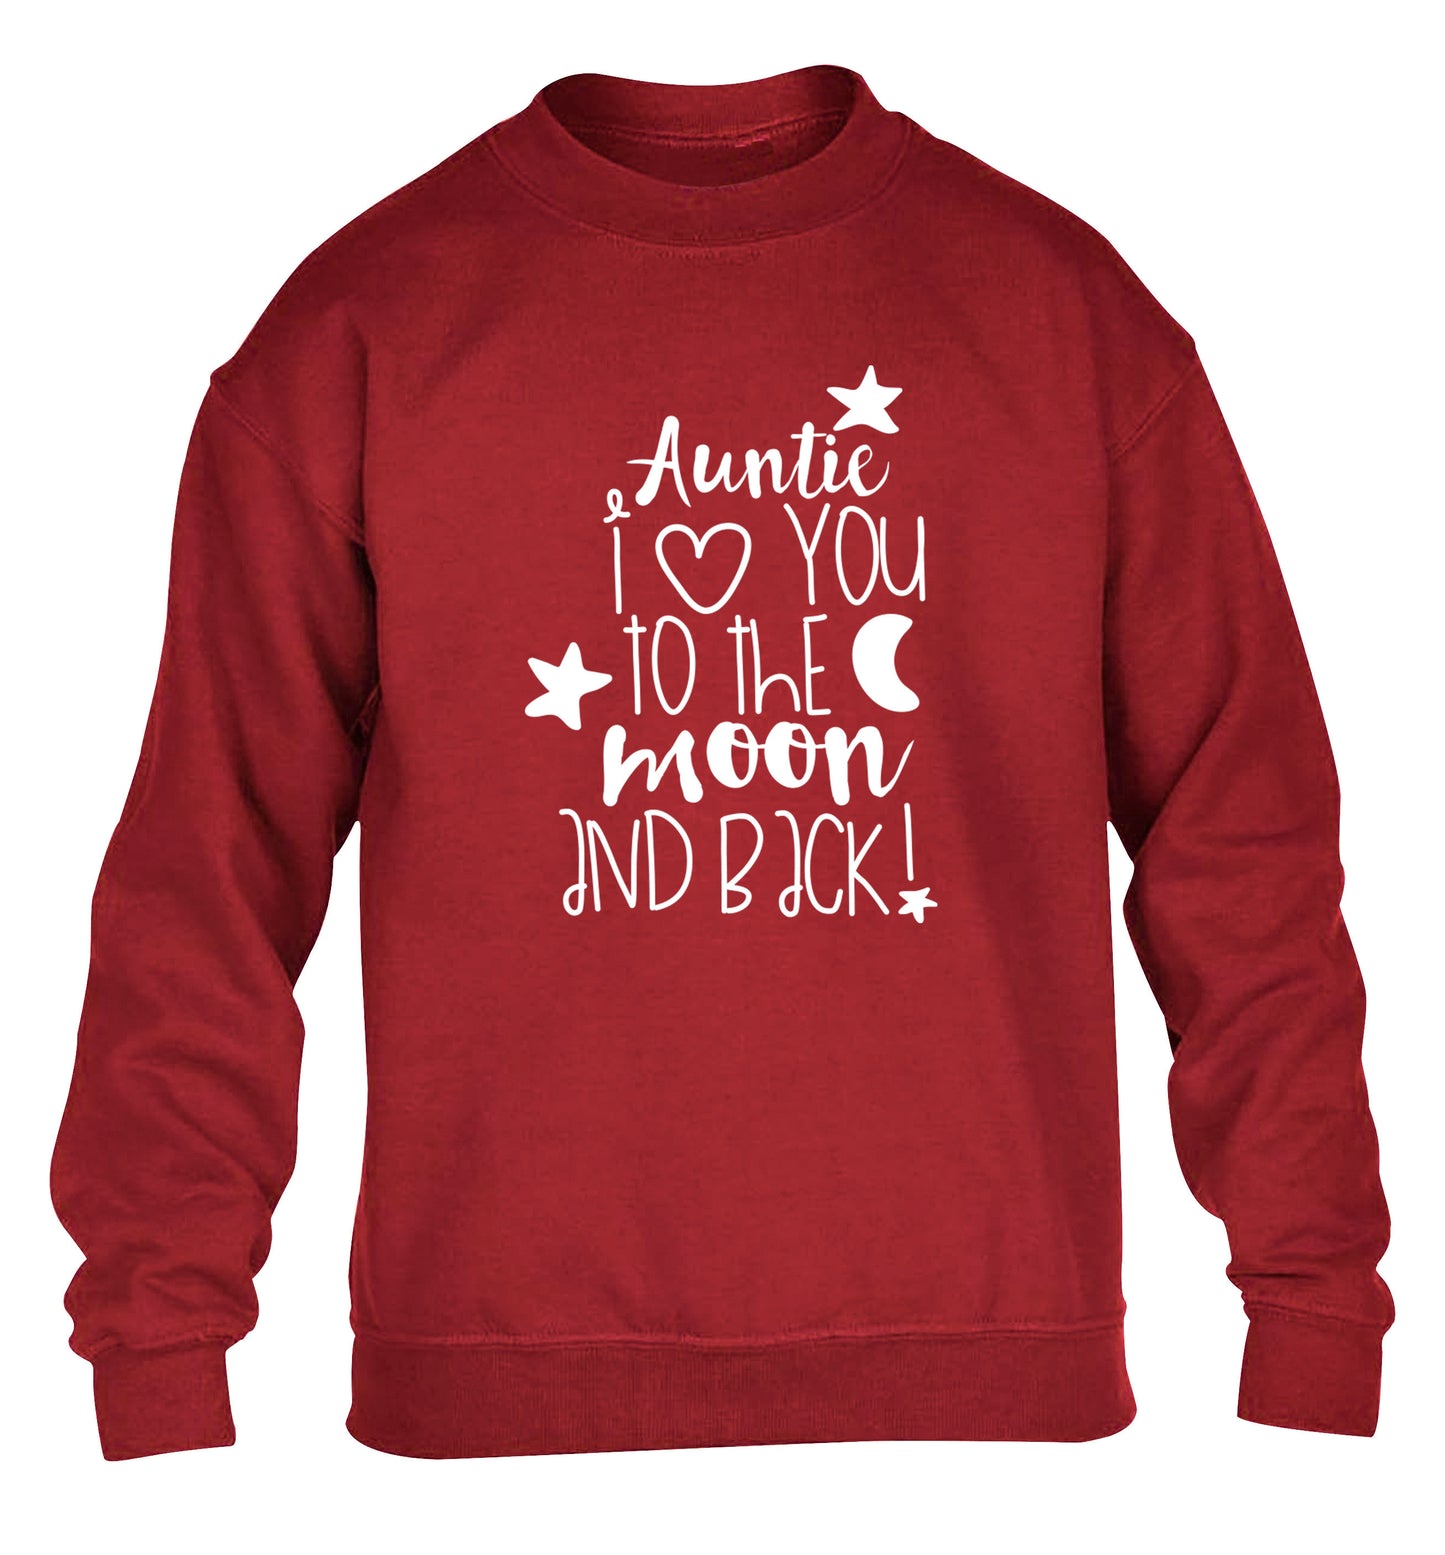 Auntie I love you to the moon and back children's grey  sweater 12-14 Years